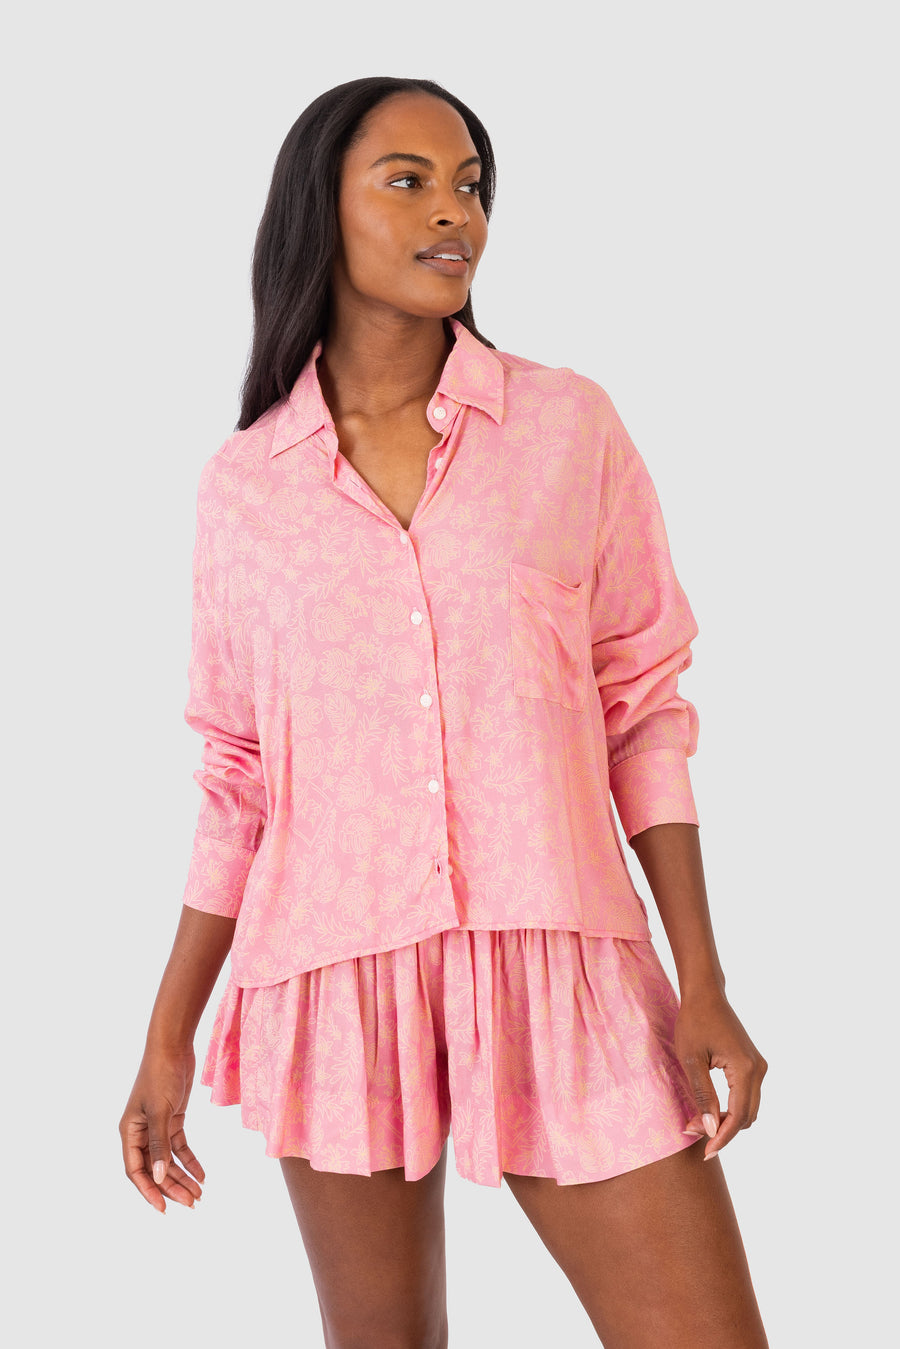 Benny Top Pink Surf Toile *Limited*Edition*